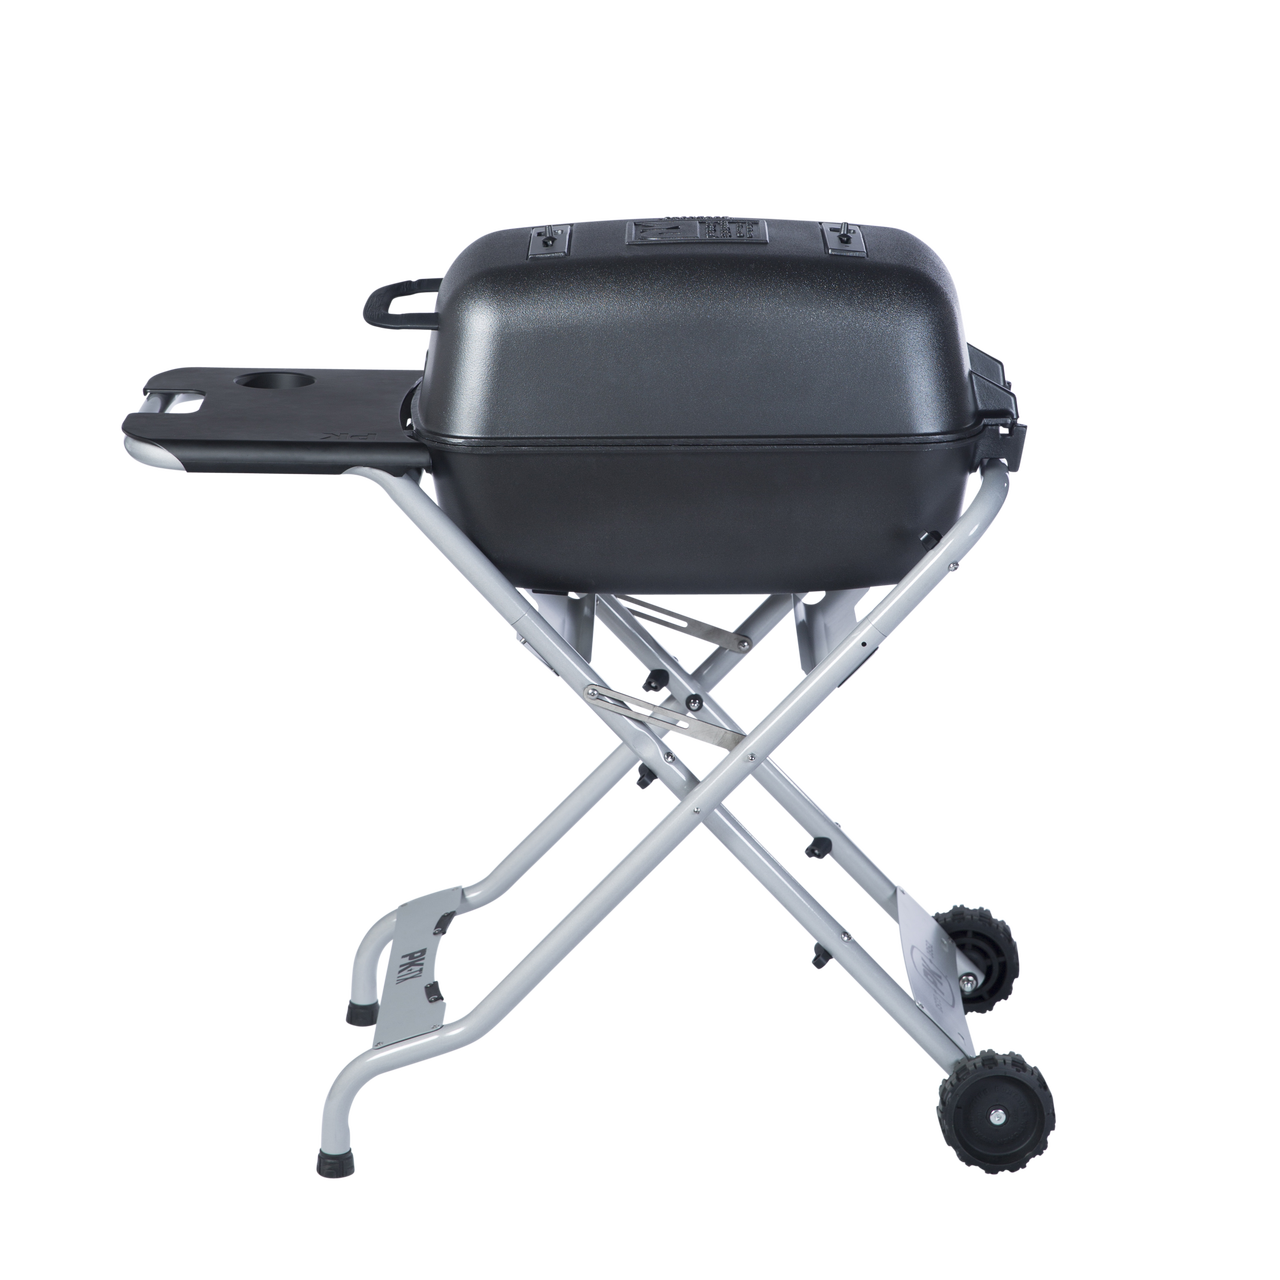 PKTX-Original-Graphite-Grill-08-Back.png